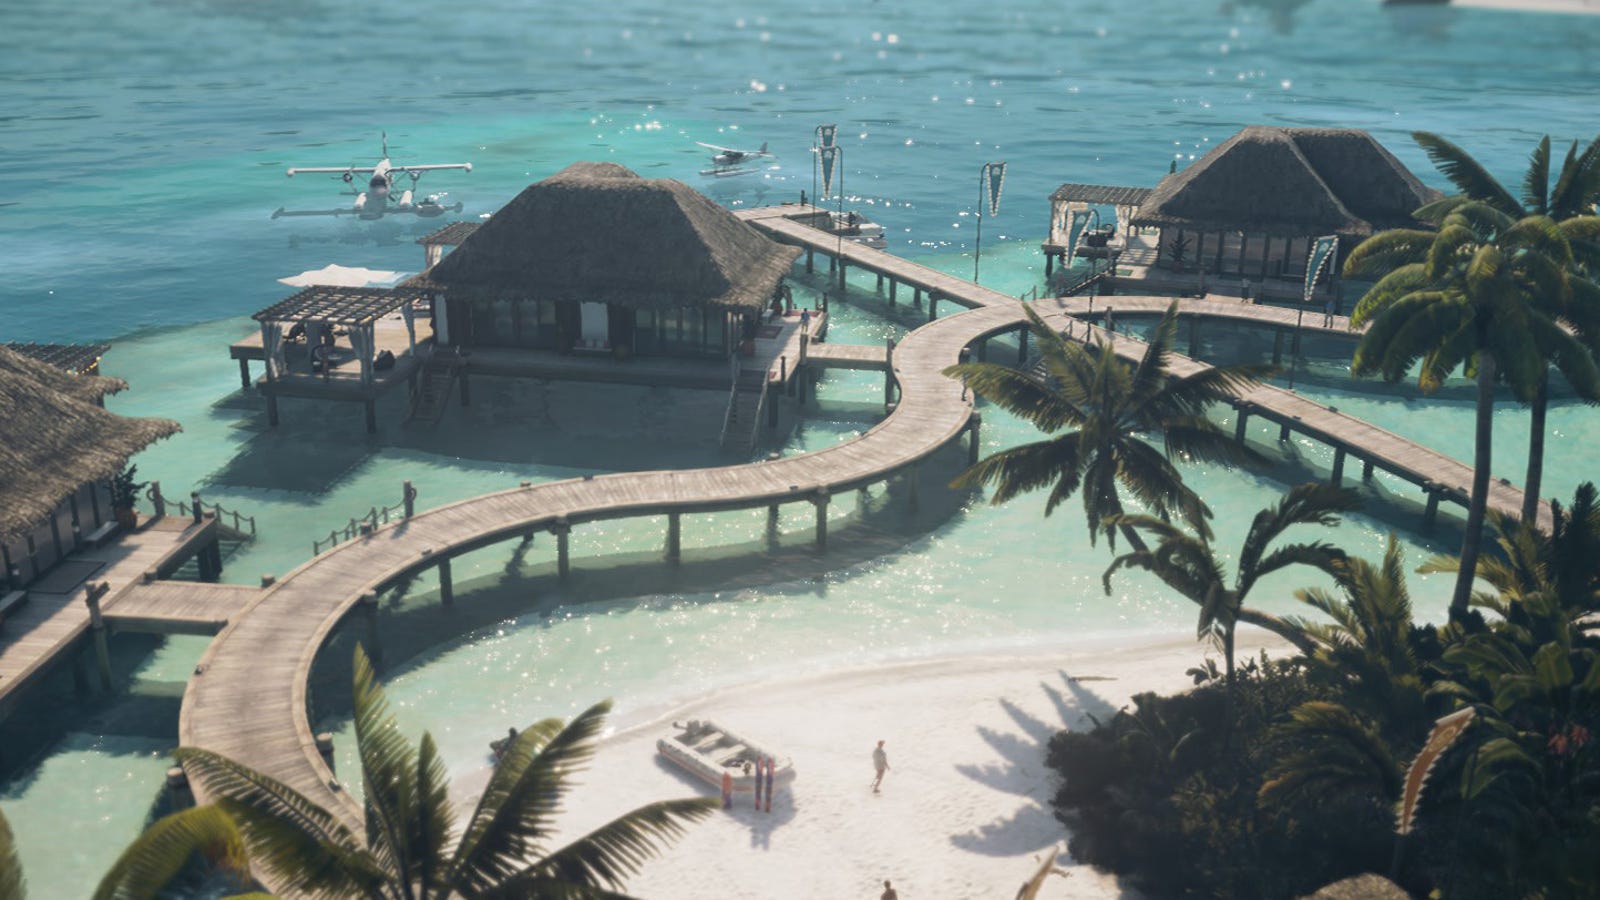 hitman-2-s-luxury-resort-is-the-perfect-setting-for-murder